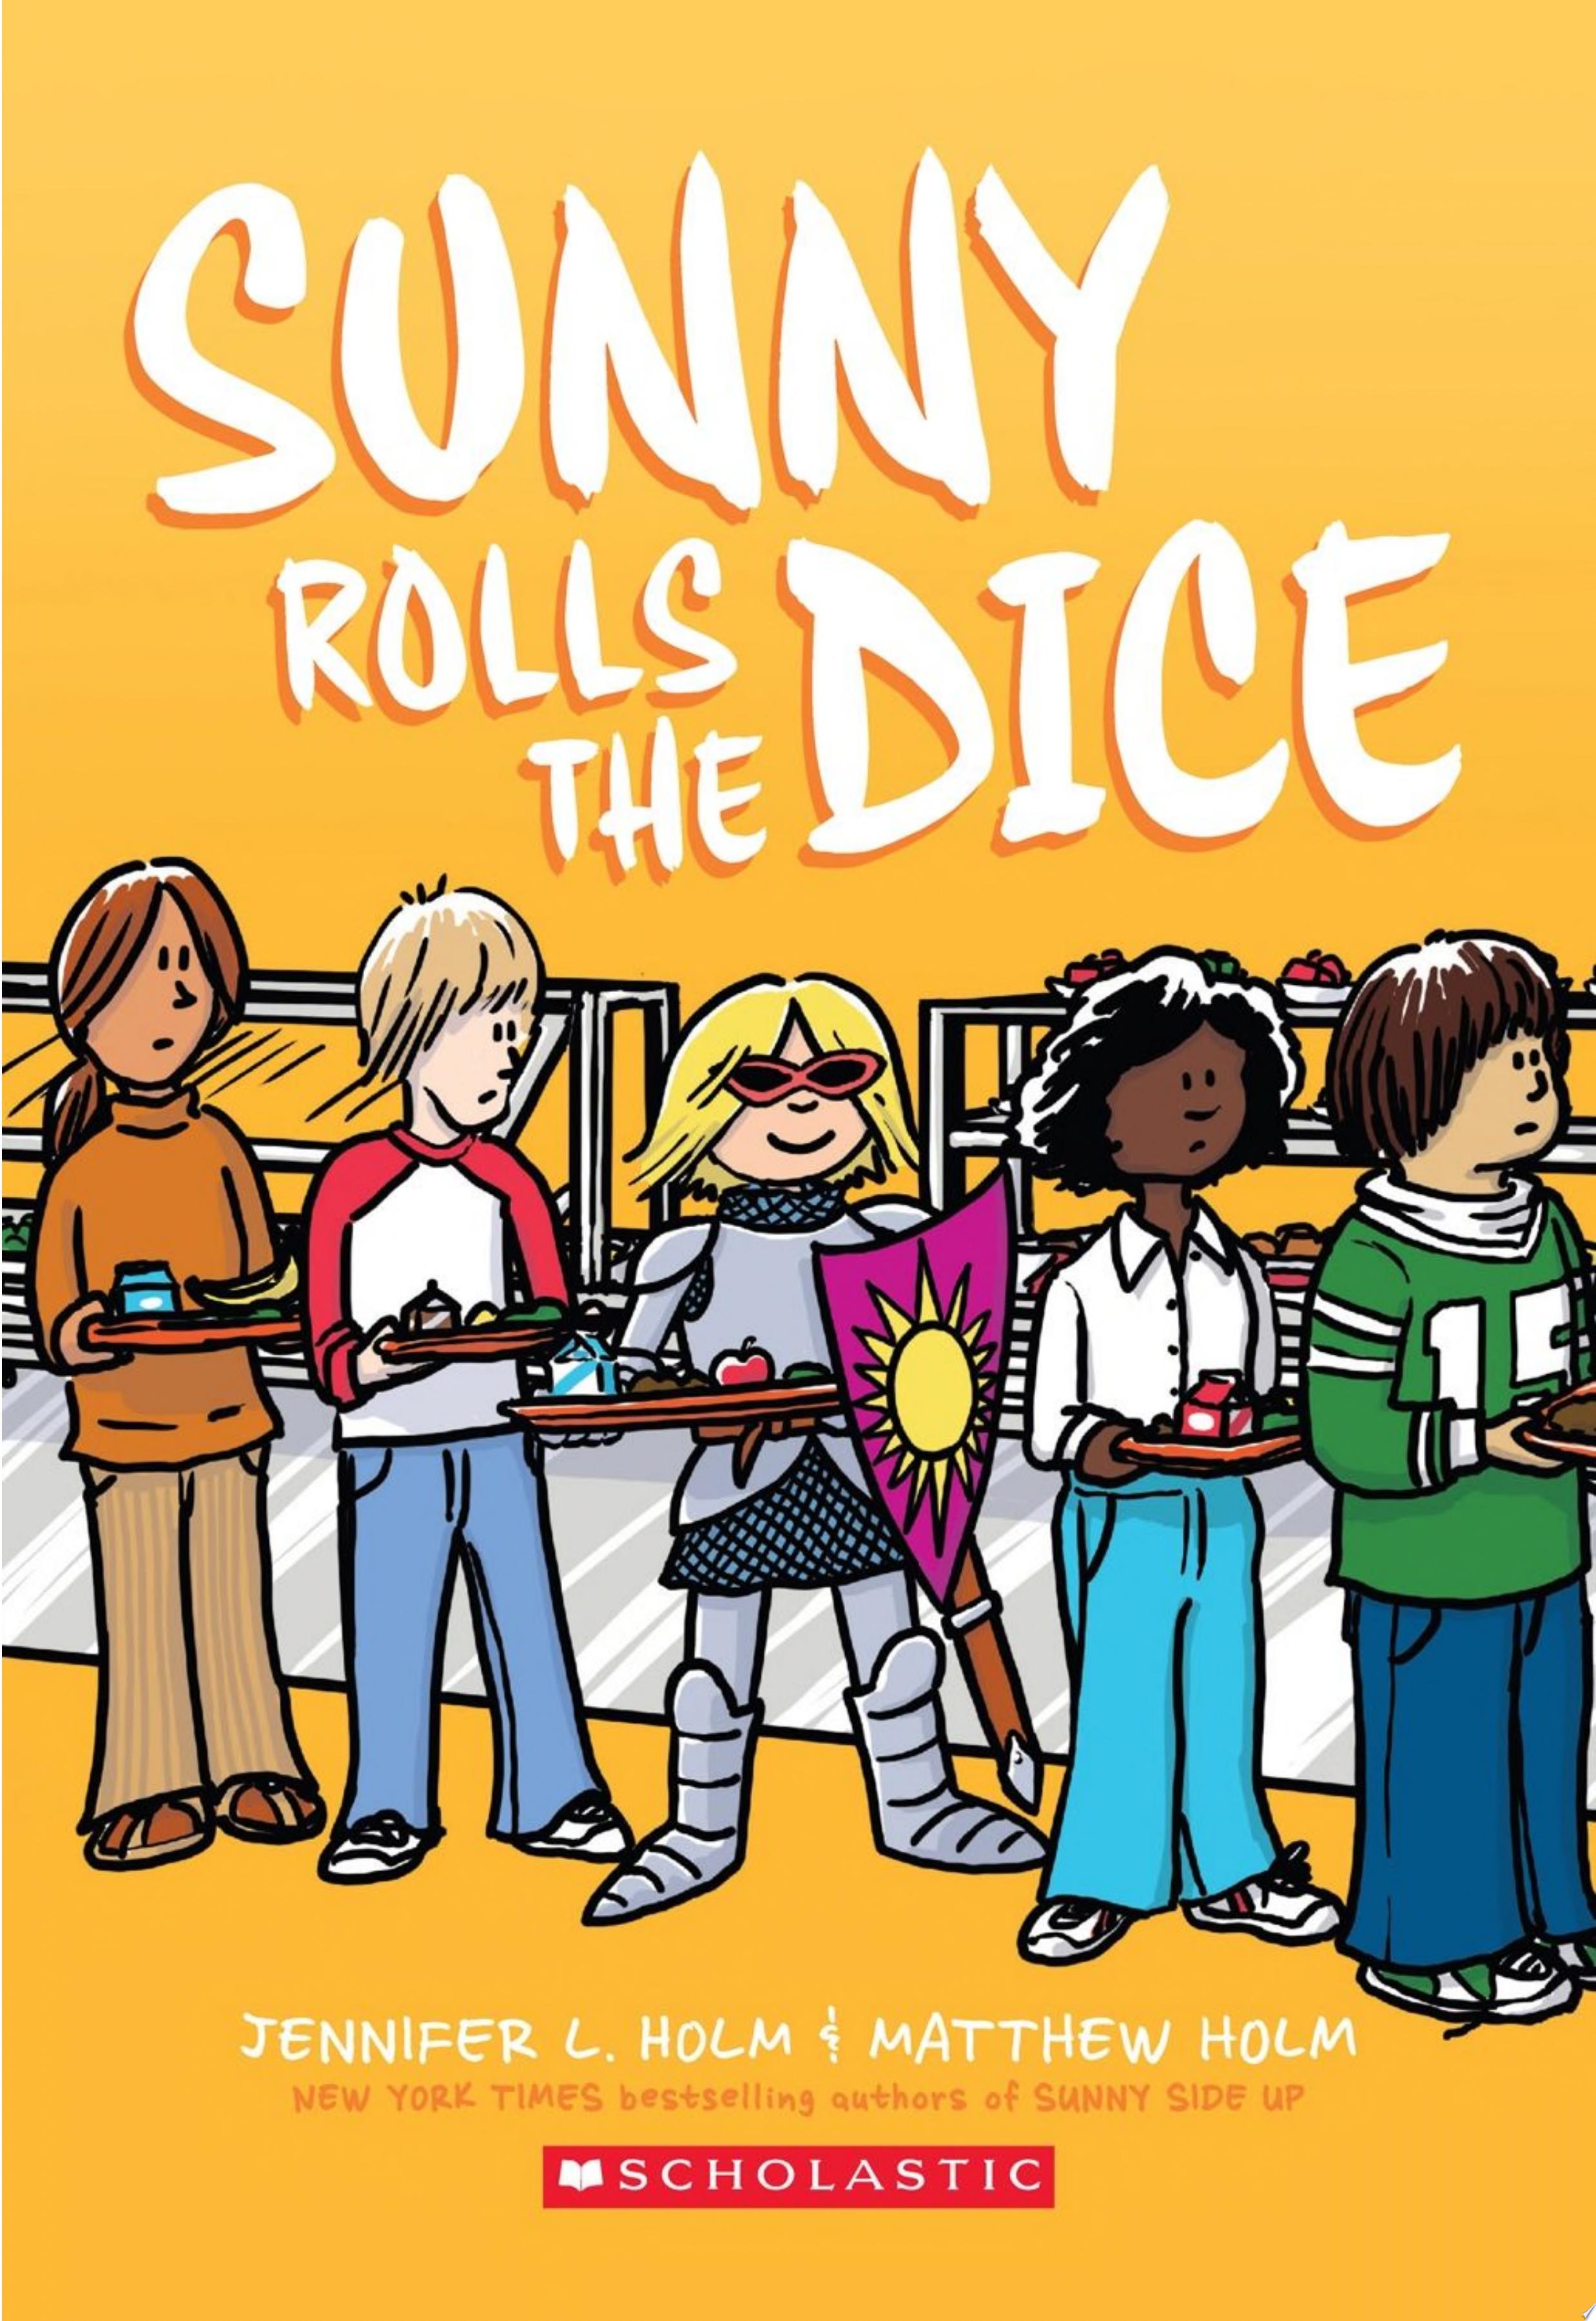 Image for "Sunny Rolls the Dice"